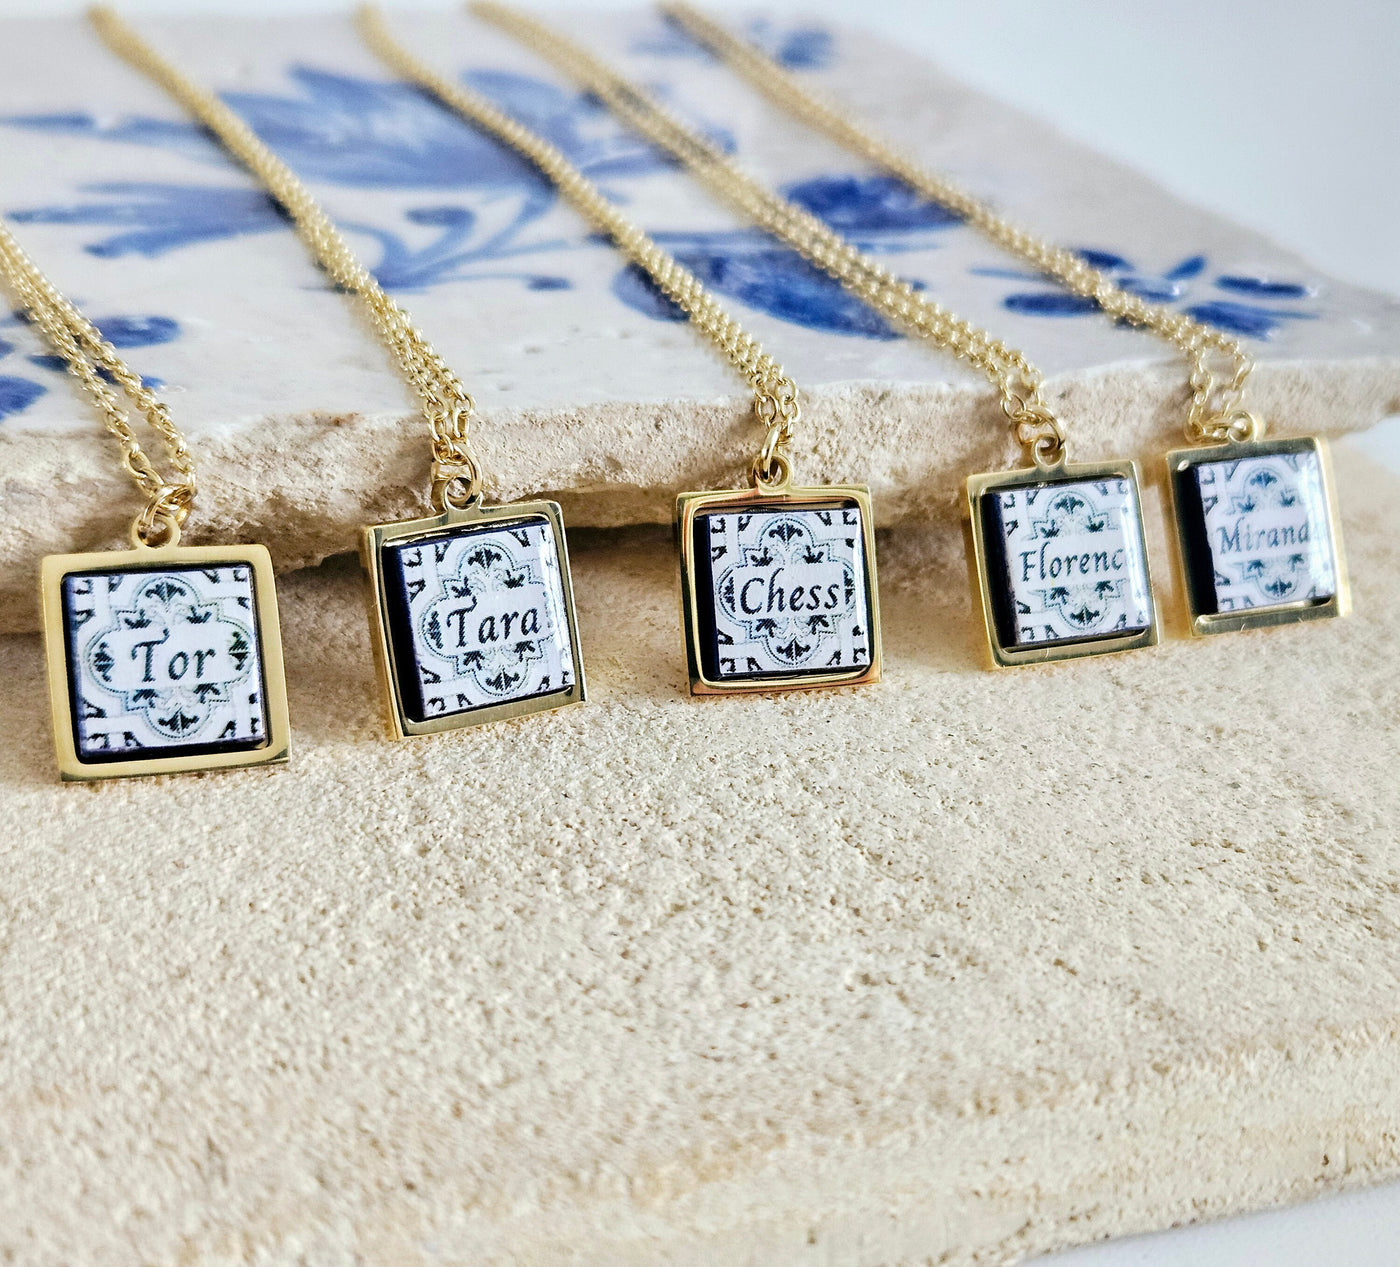 Custom Name Necklace Portugal Tile Gold Necklace Gift Personalized Handmade Script Letter Name Necklace Jewelry Blue White Azulejo Pendant